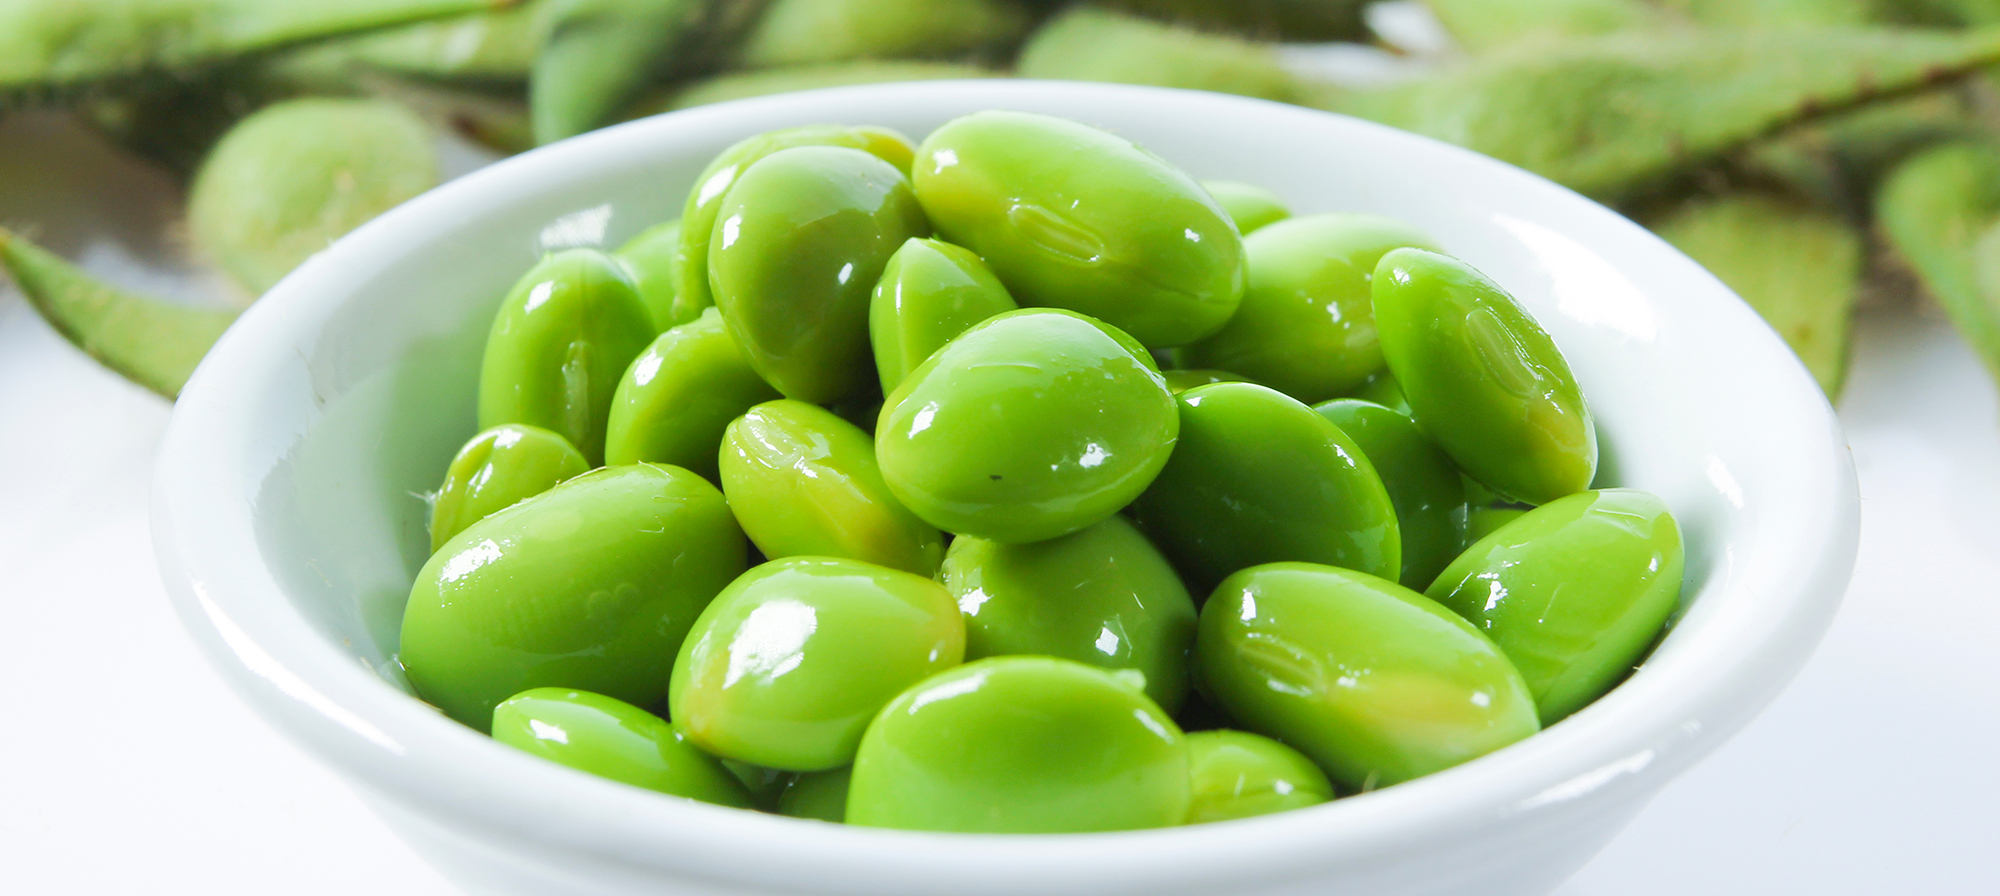 For a Healthy Recipe That’s Quick and Easy, Try This Tasty Edamame Salad